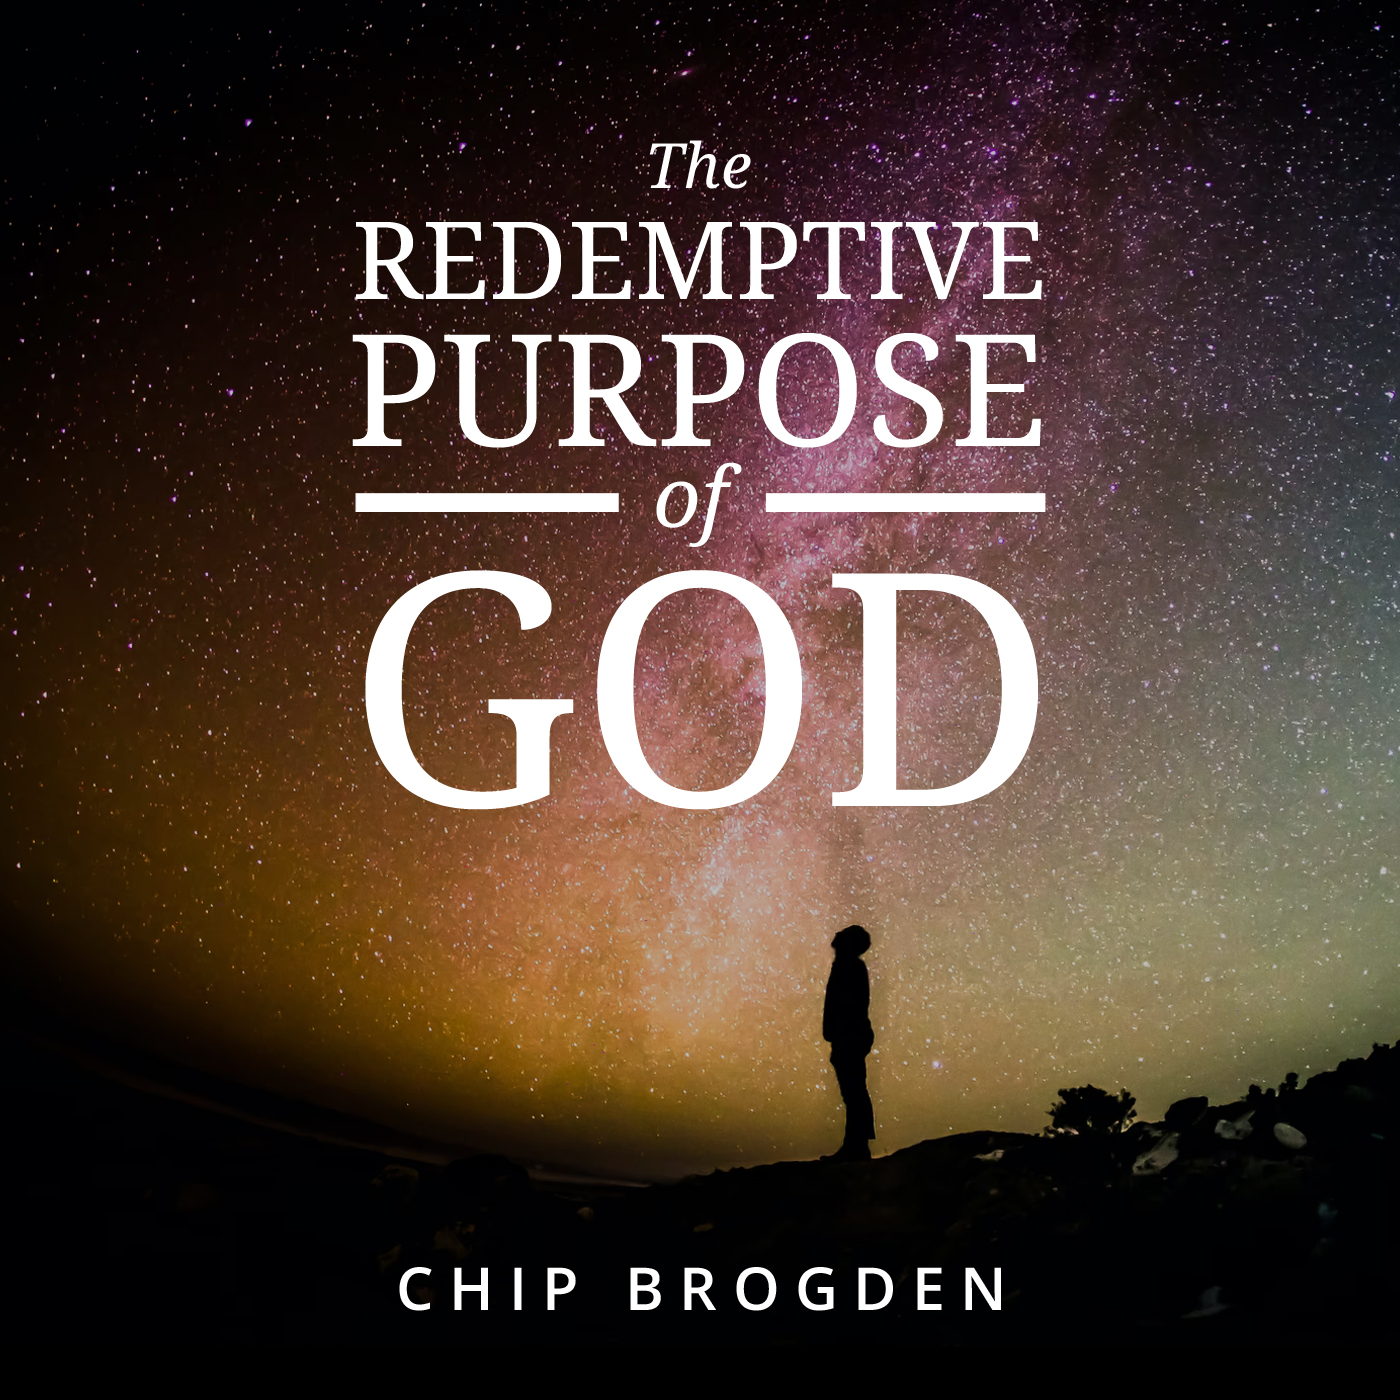 The Redemptive Purpose of God